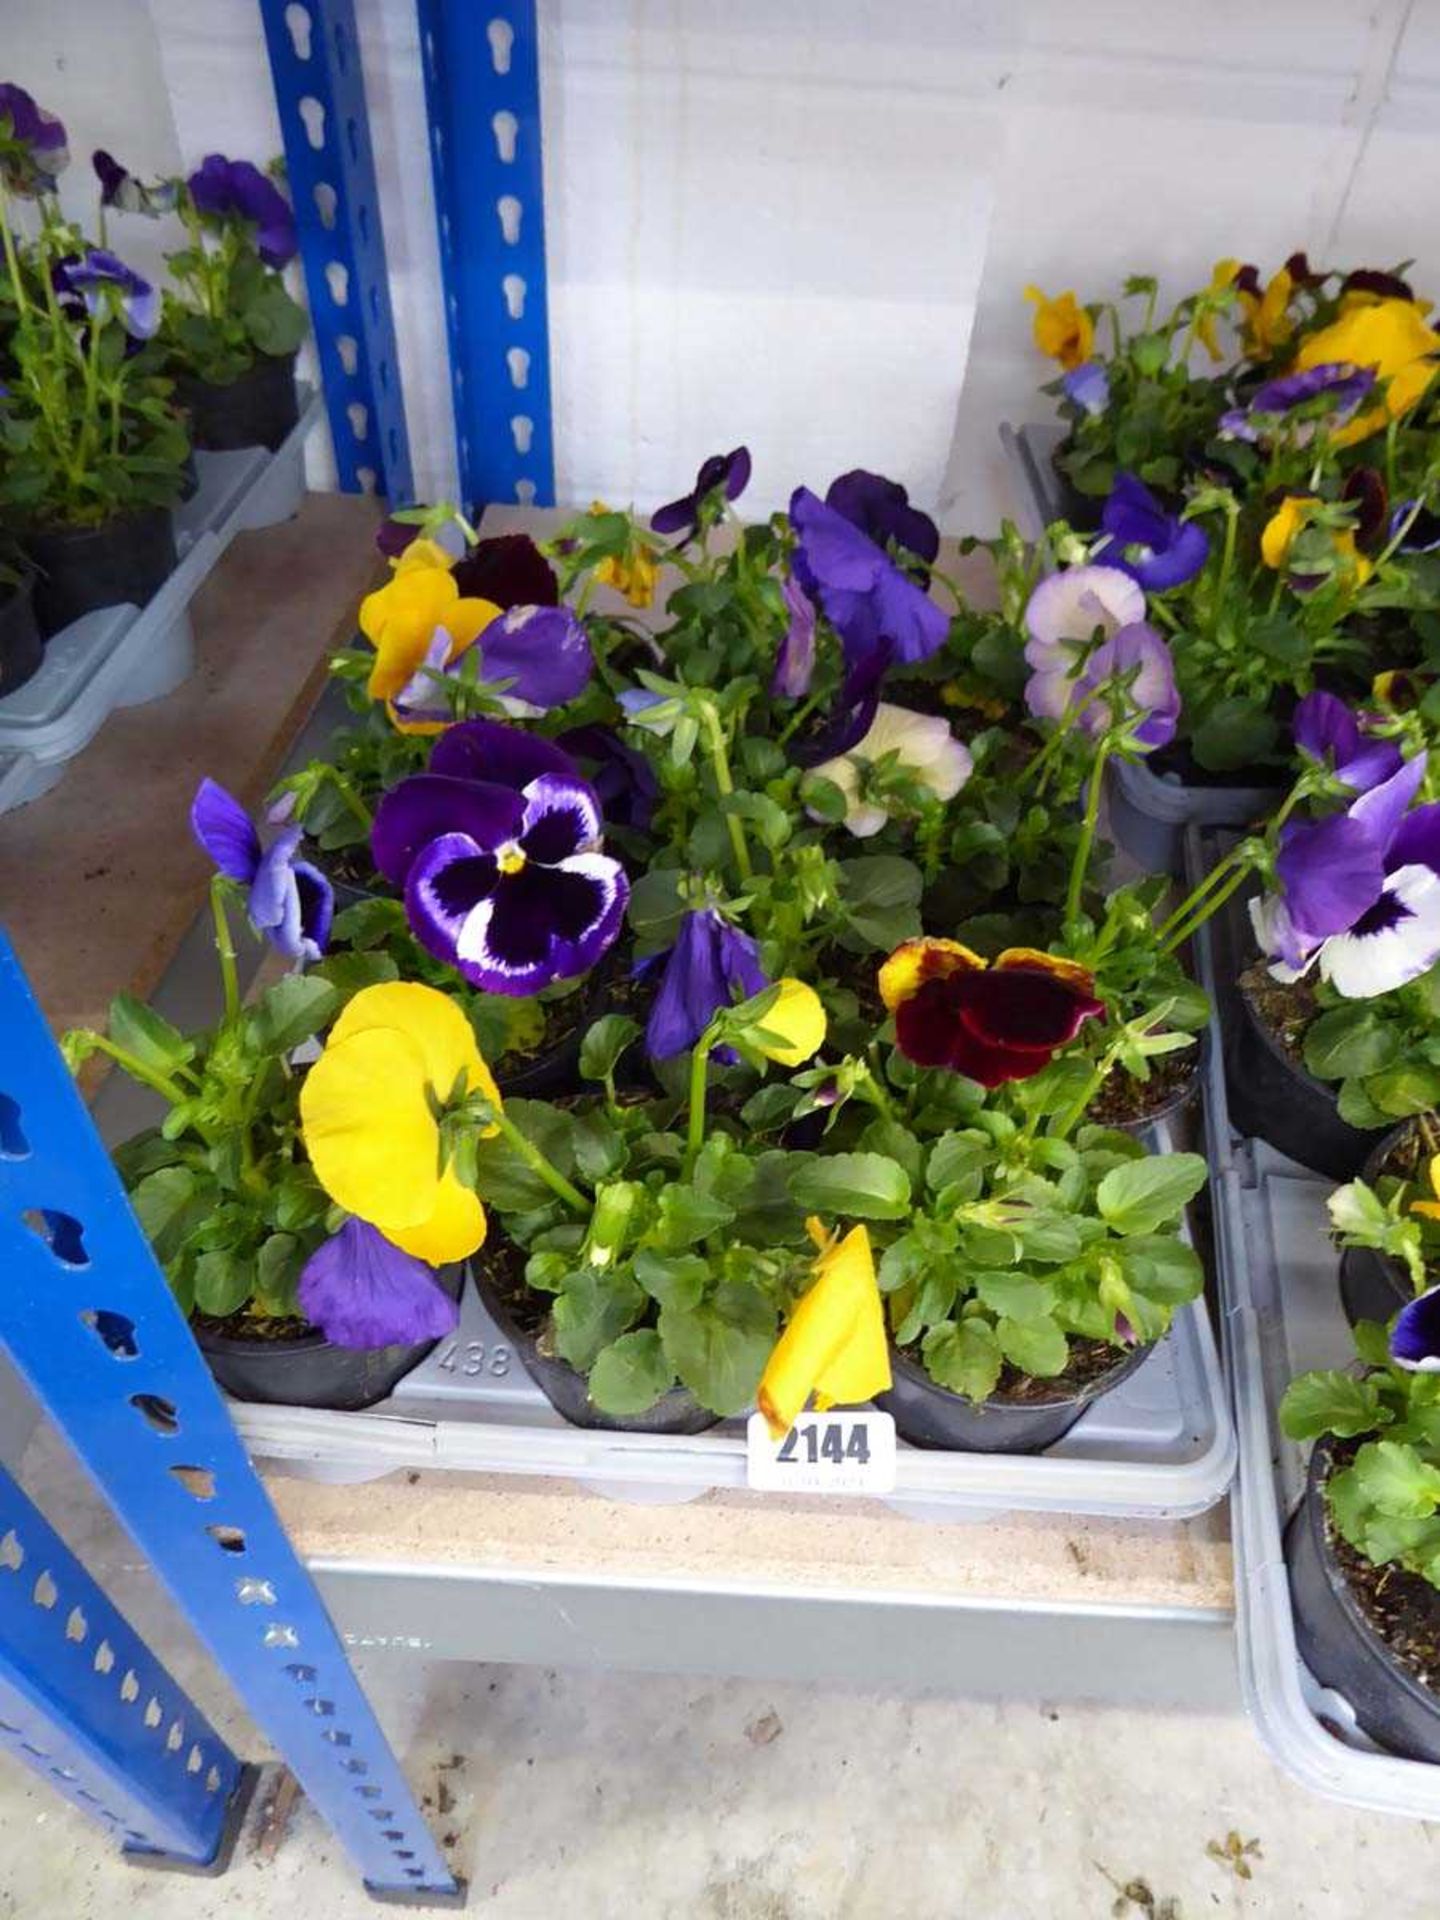 1 tray of pansy